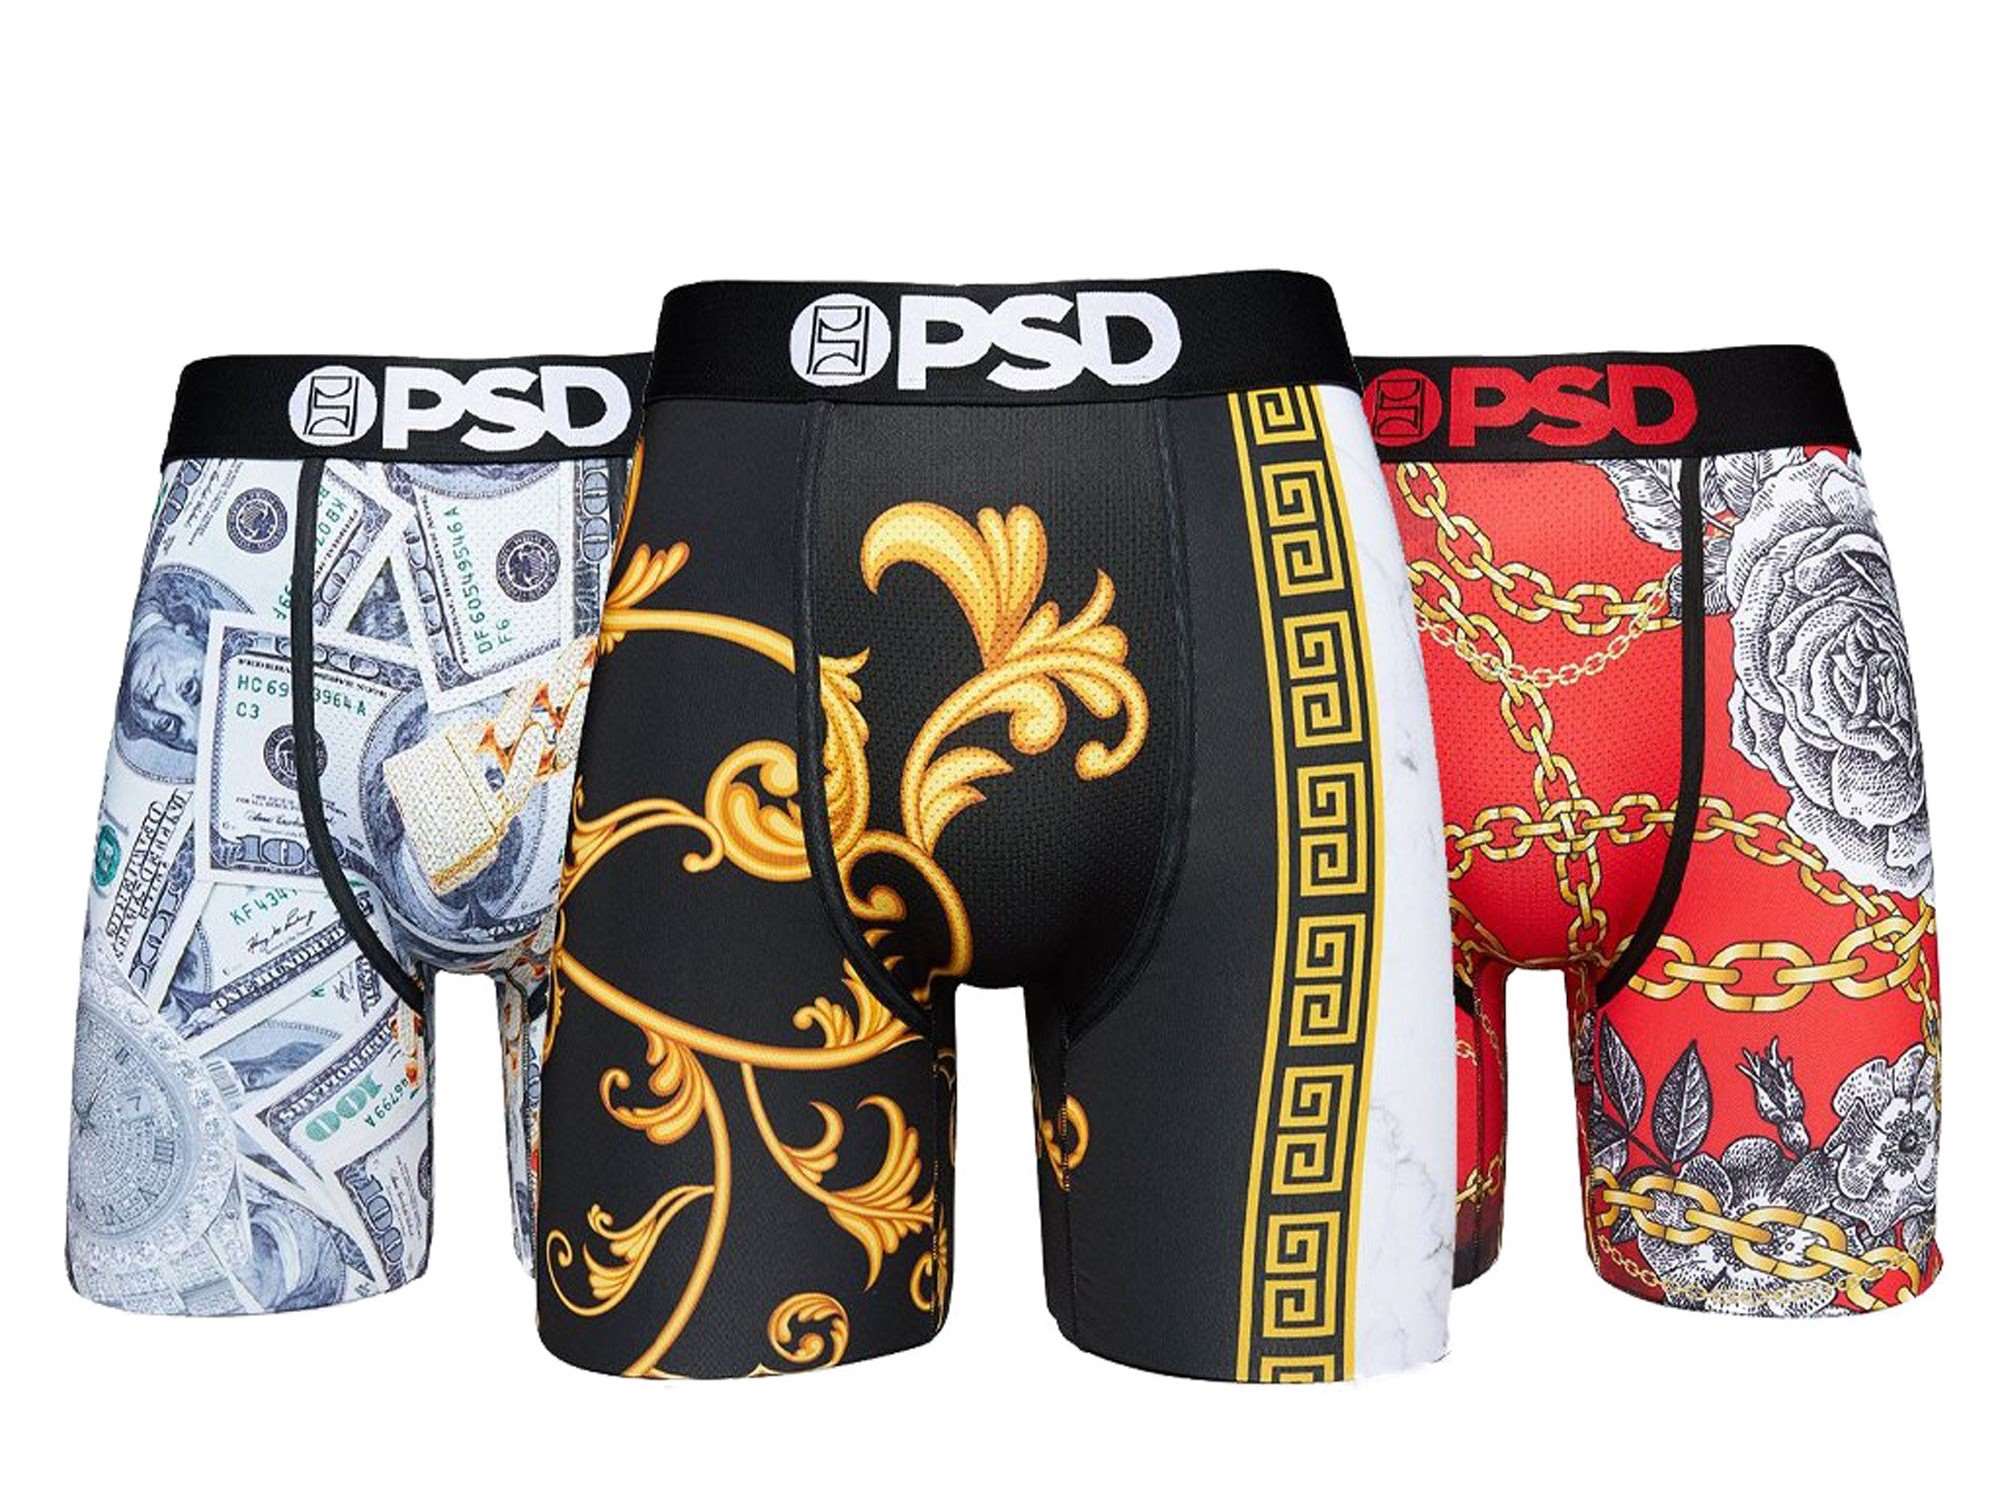 What Are PSD Underwear Made Of